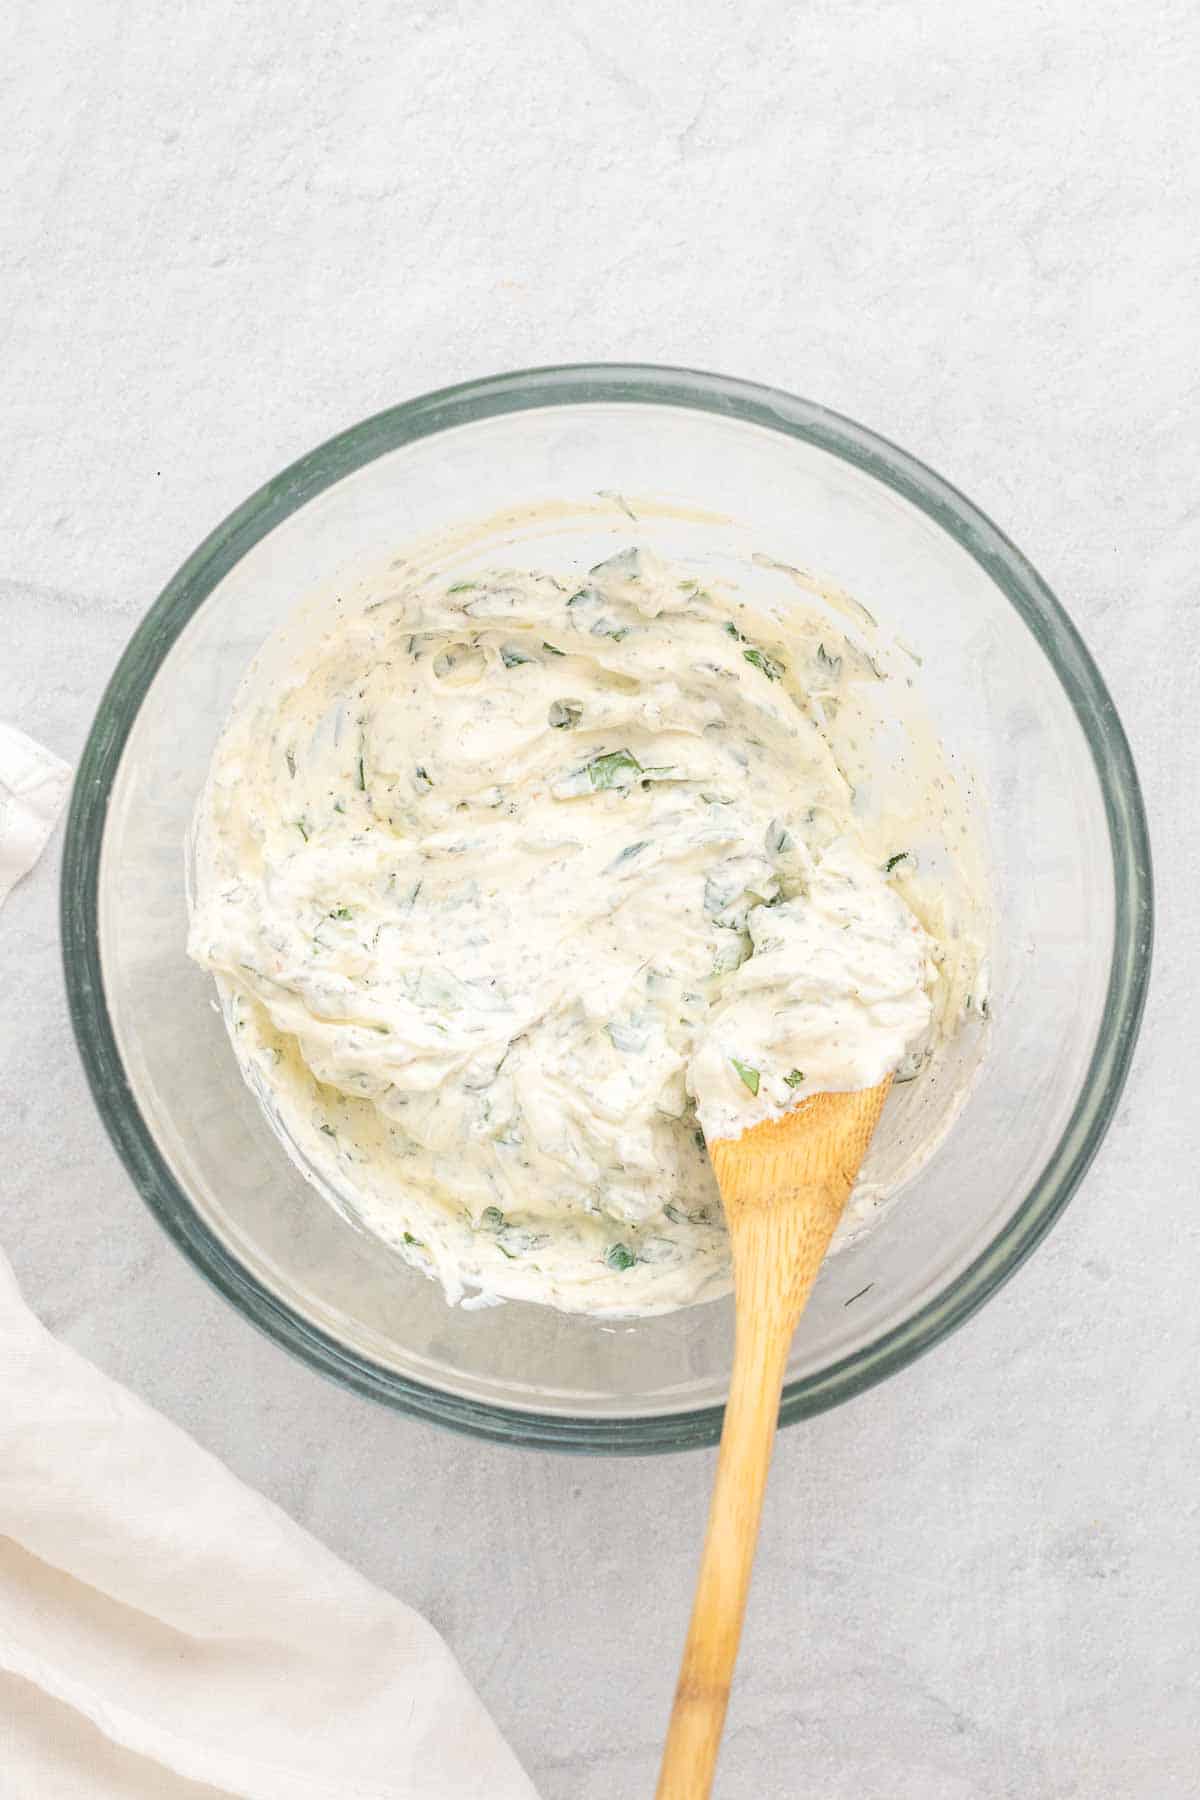 Ricotta, herbs, and seasoning mixed together in a large glass bowl with a wooden spoon, as seen from above